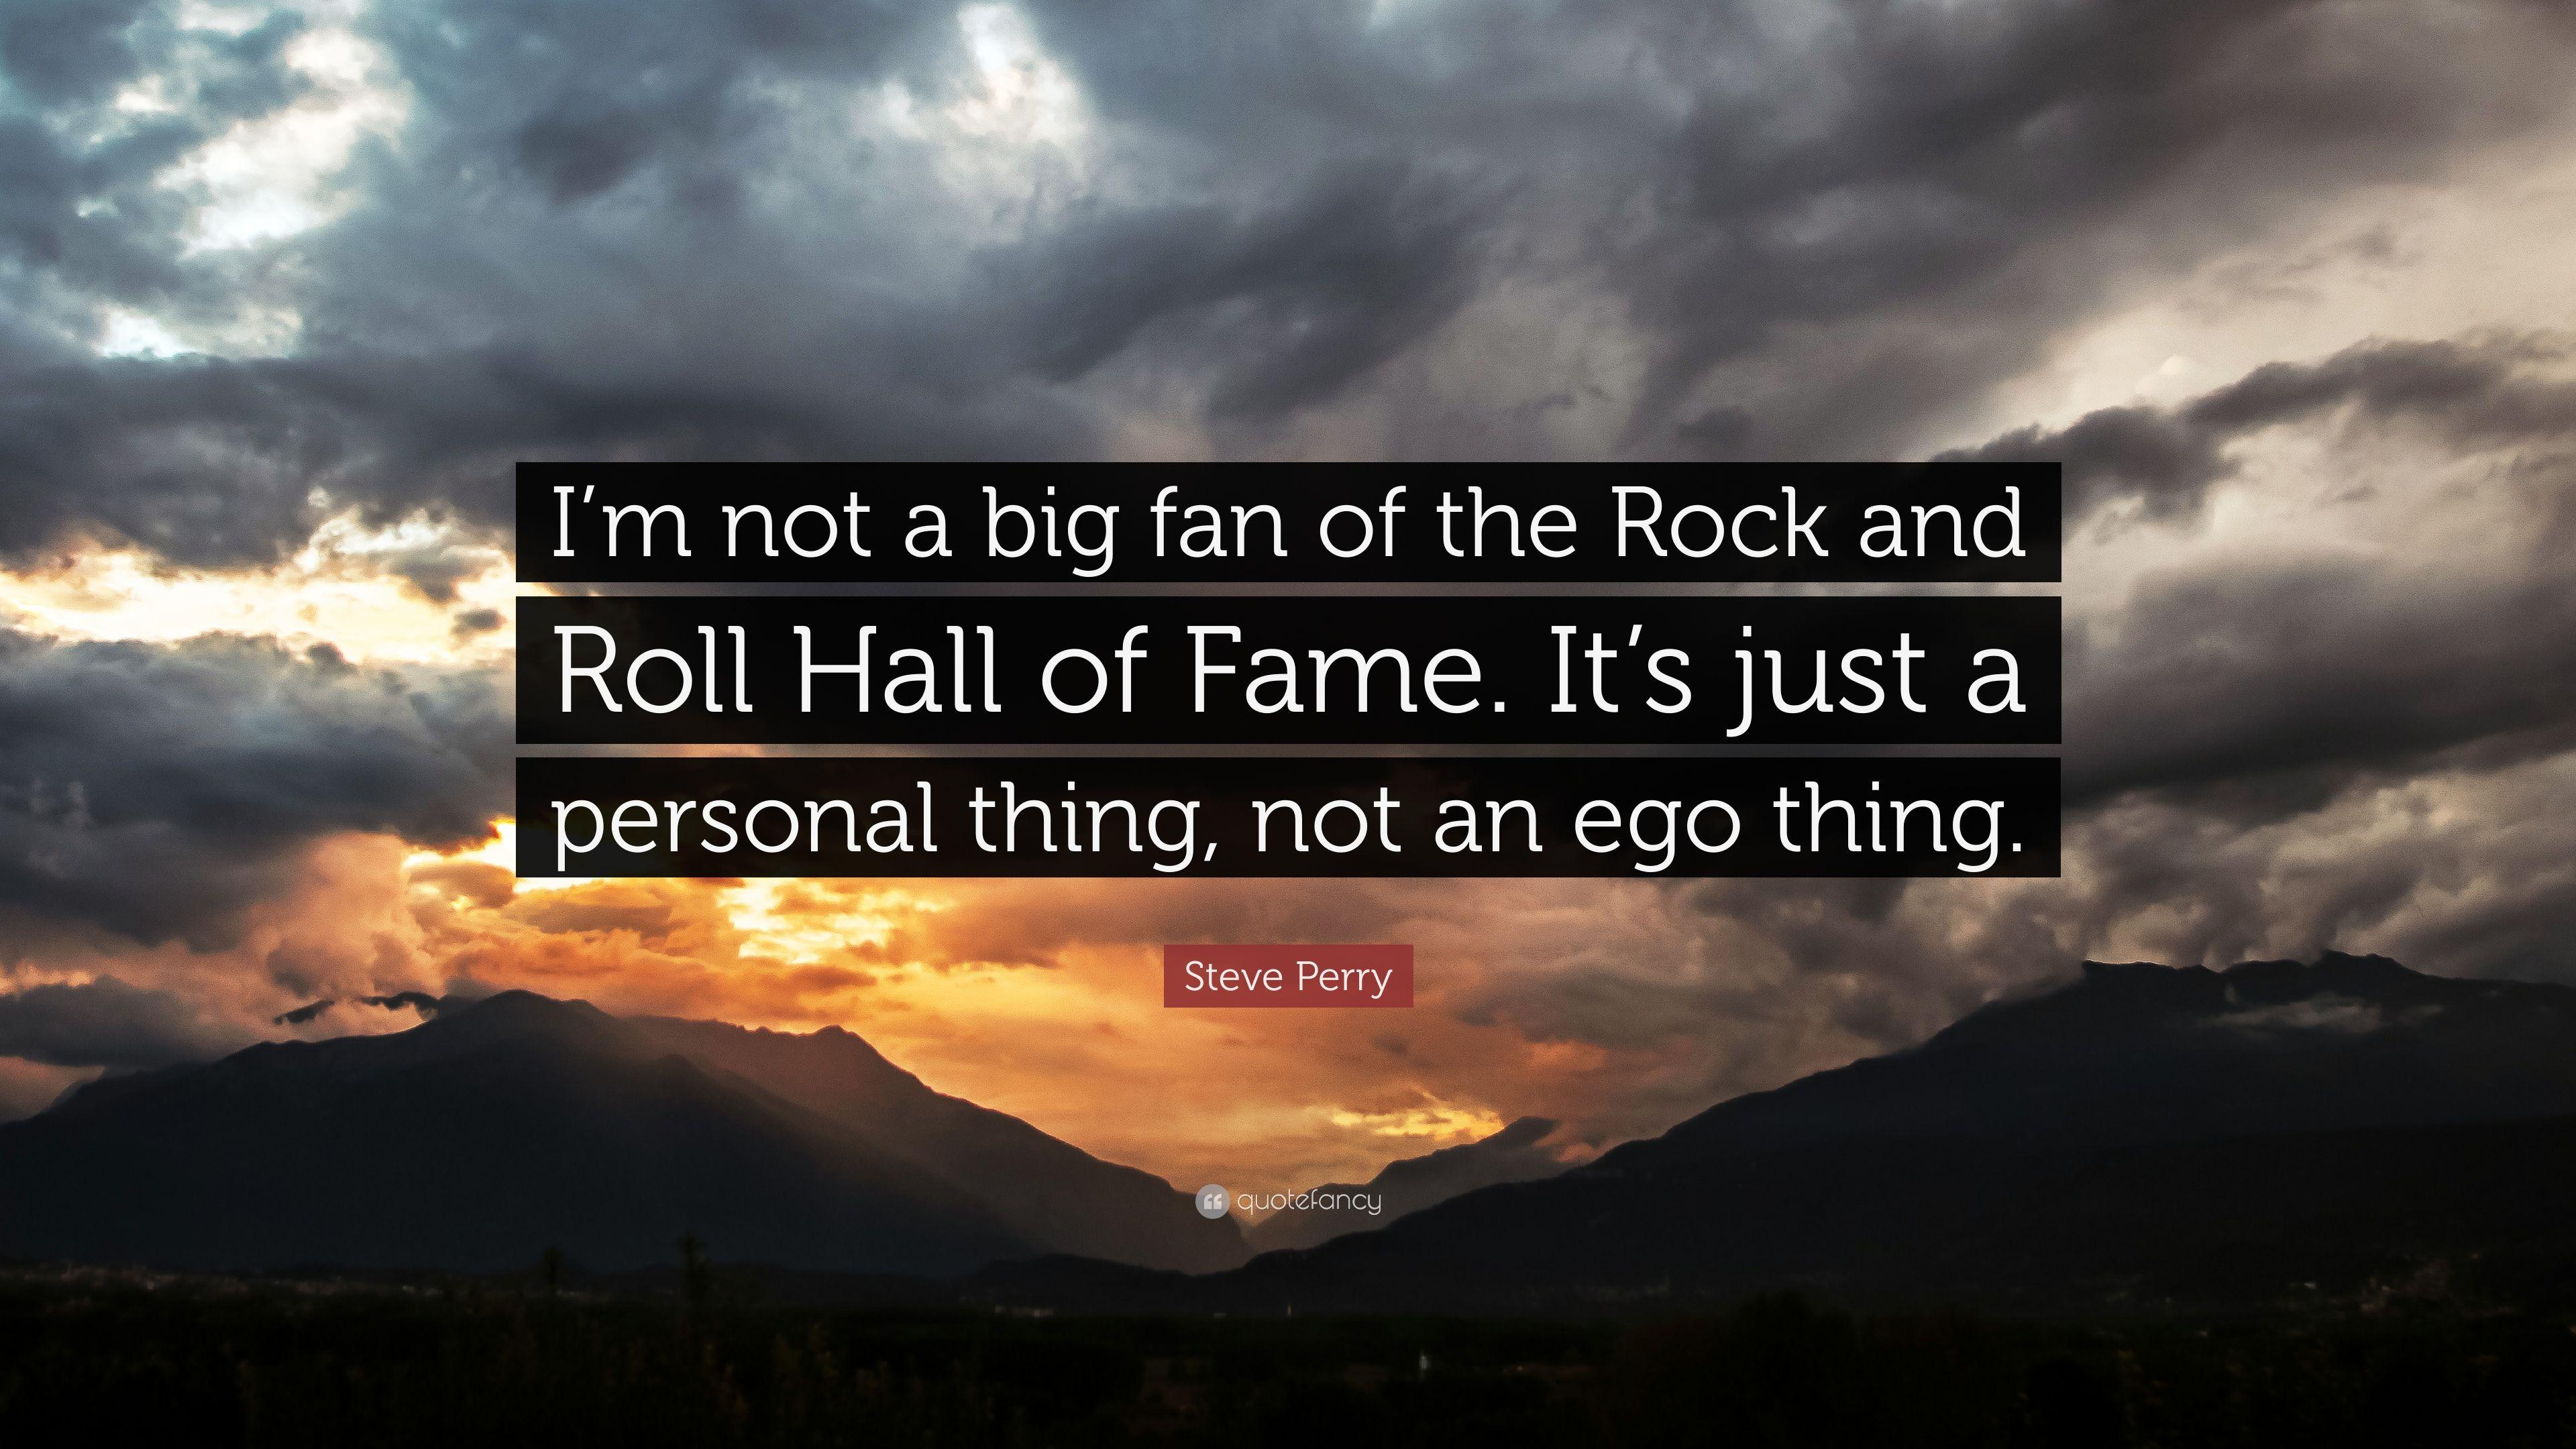 Steve Perry Quote: “I'm not a big fan of the Rock and Roll Hall